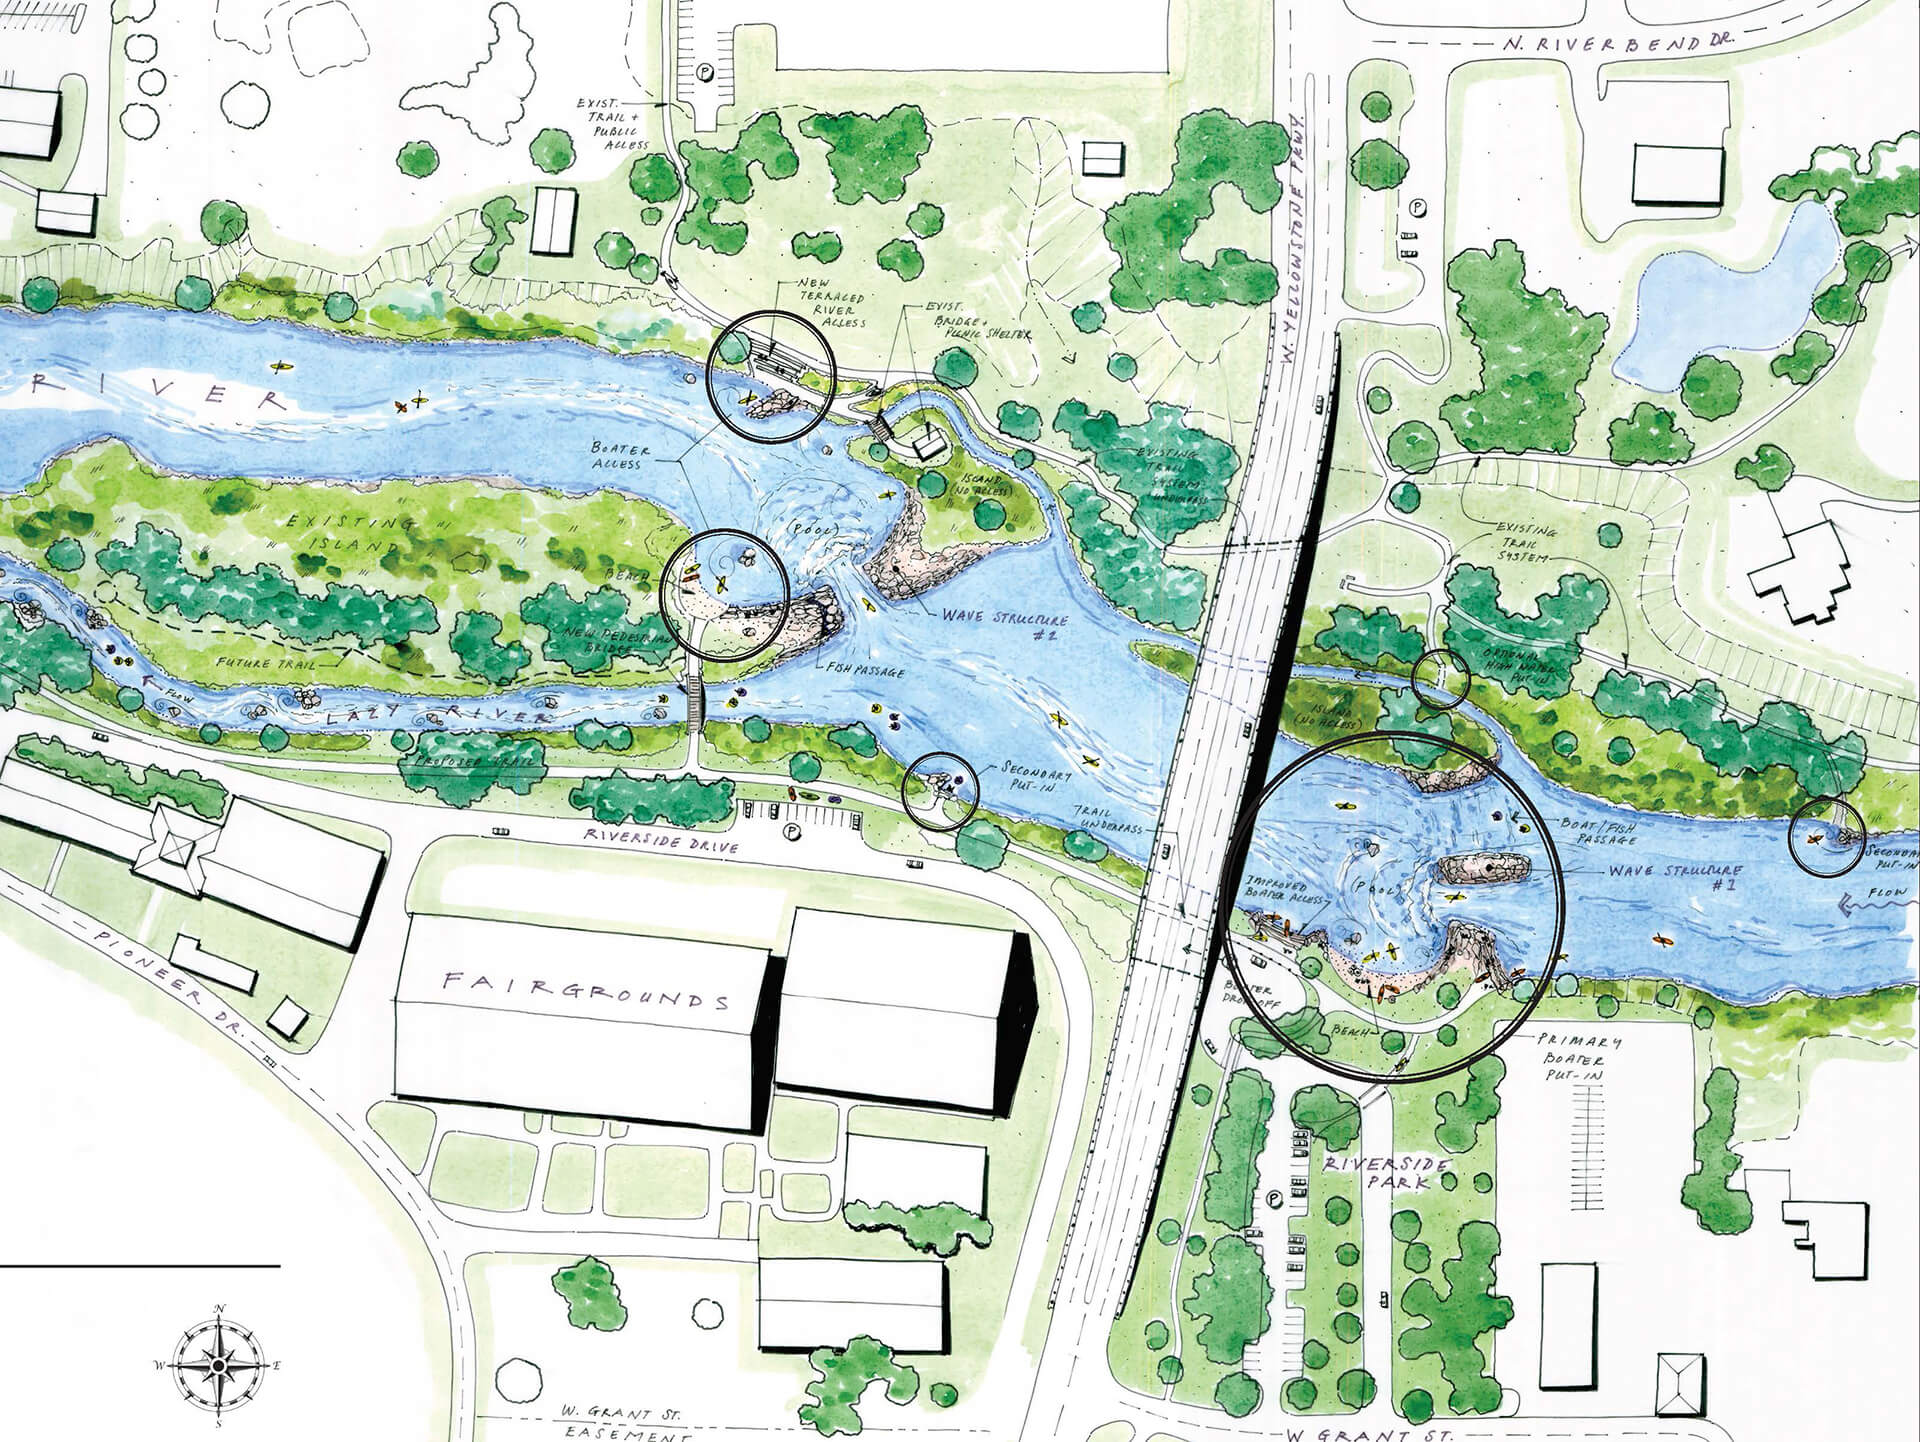 Sonoma_Pre-concept-whitewater-park-plan-illustrative-drawing